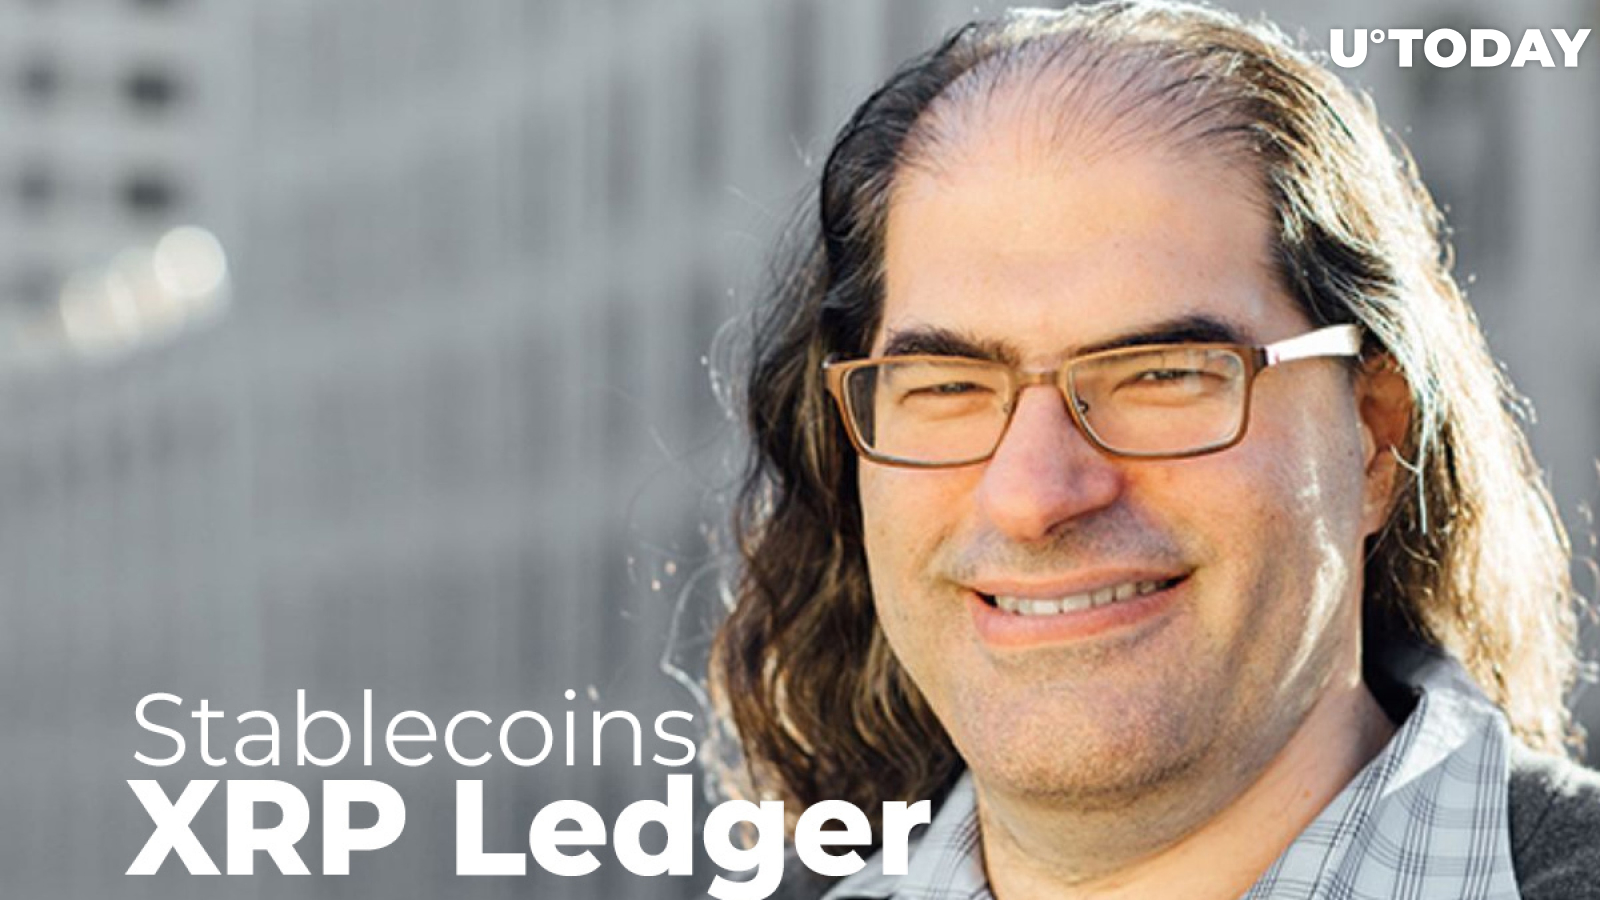 XRP Ledger Can Help Banks Create Stablecoins, Ripple CTO States